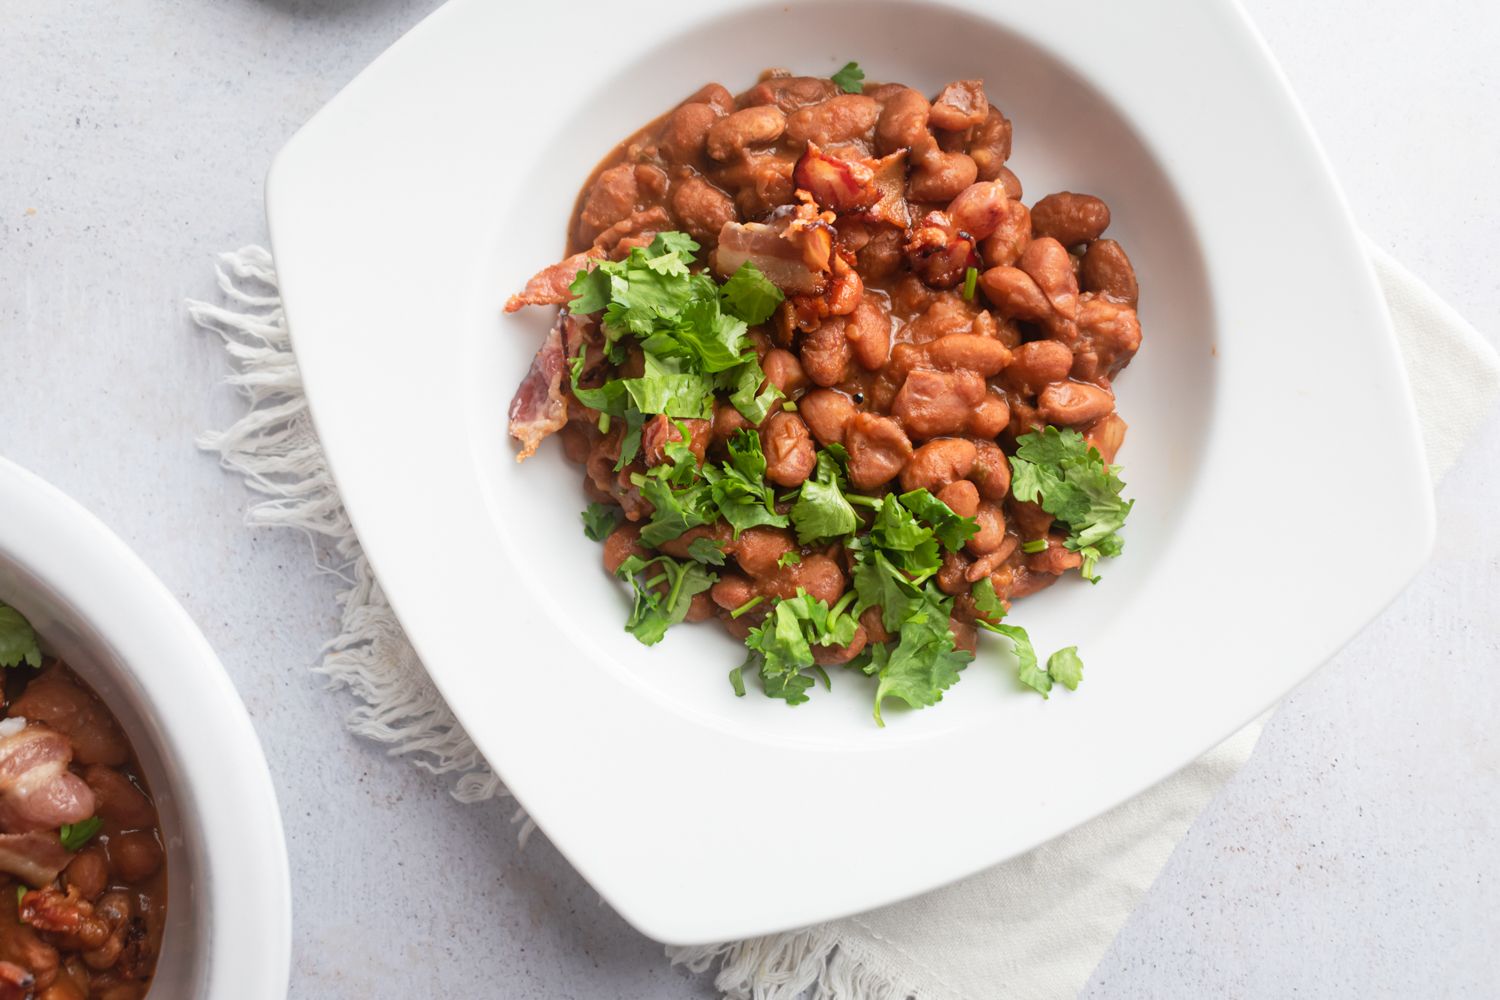 Crockpot borracho beans served in a white bowl with crispy bacon pieces and fresh cilamtro.